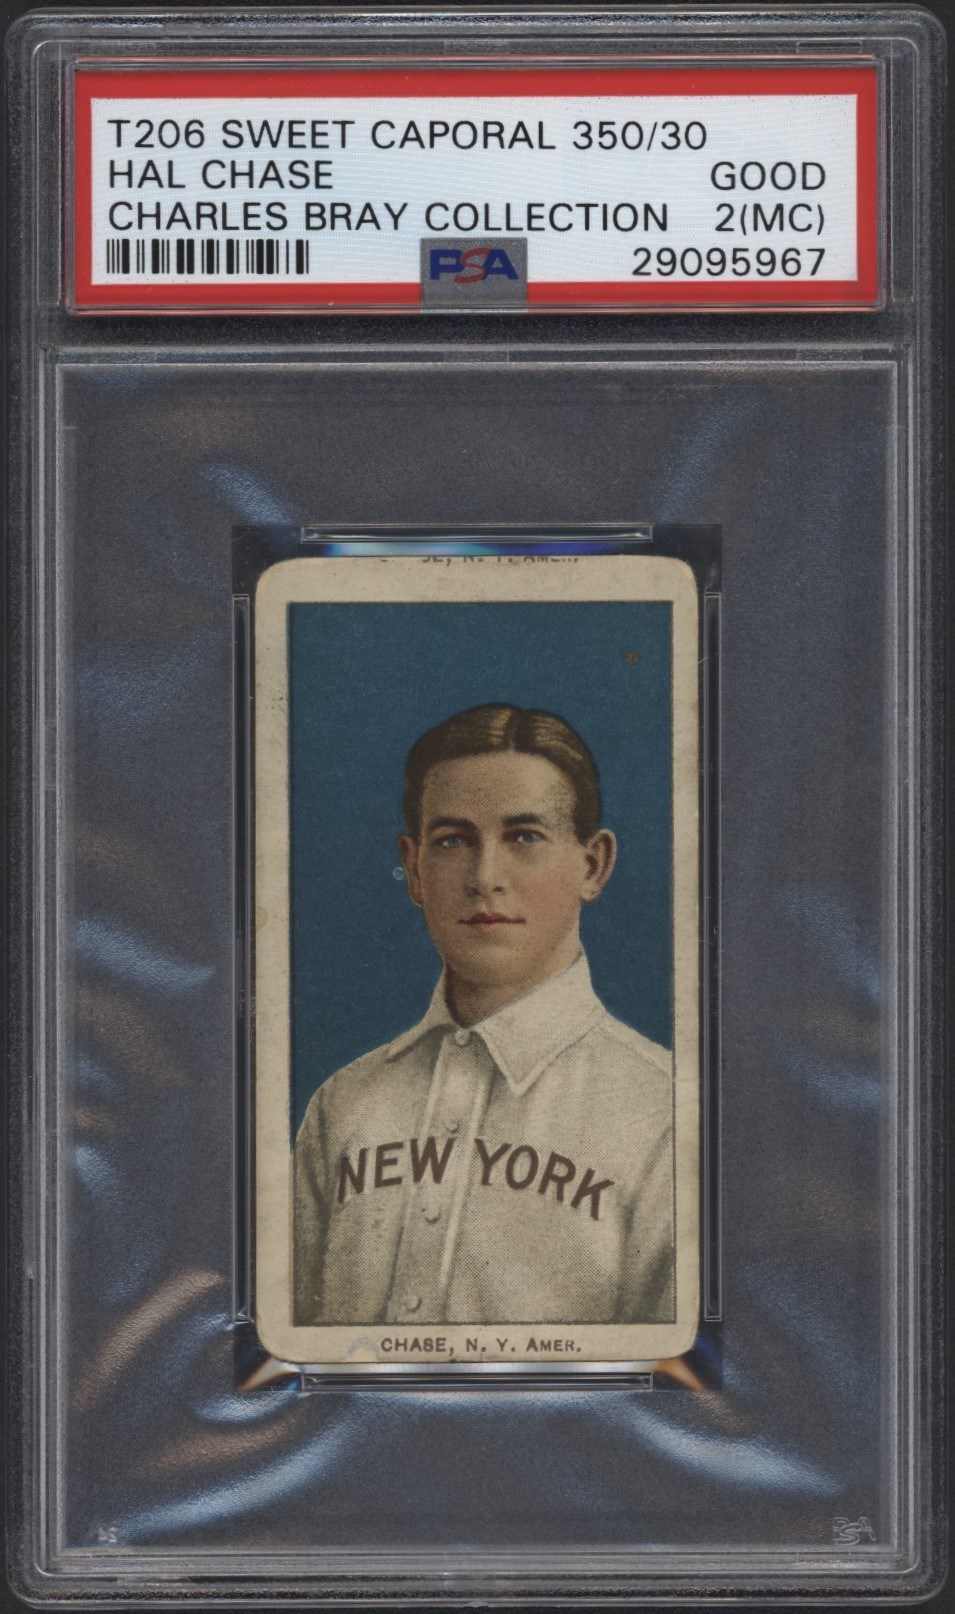 T206 Sweet Caporal 350/30 Hal Chase Blue Portrait PSA 2 From the Charles Bray Collection